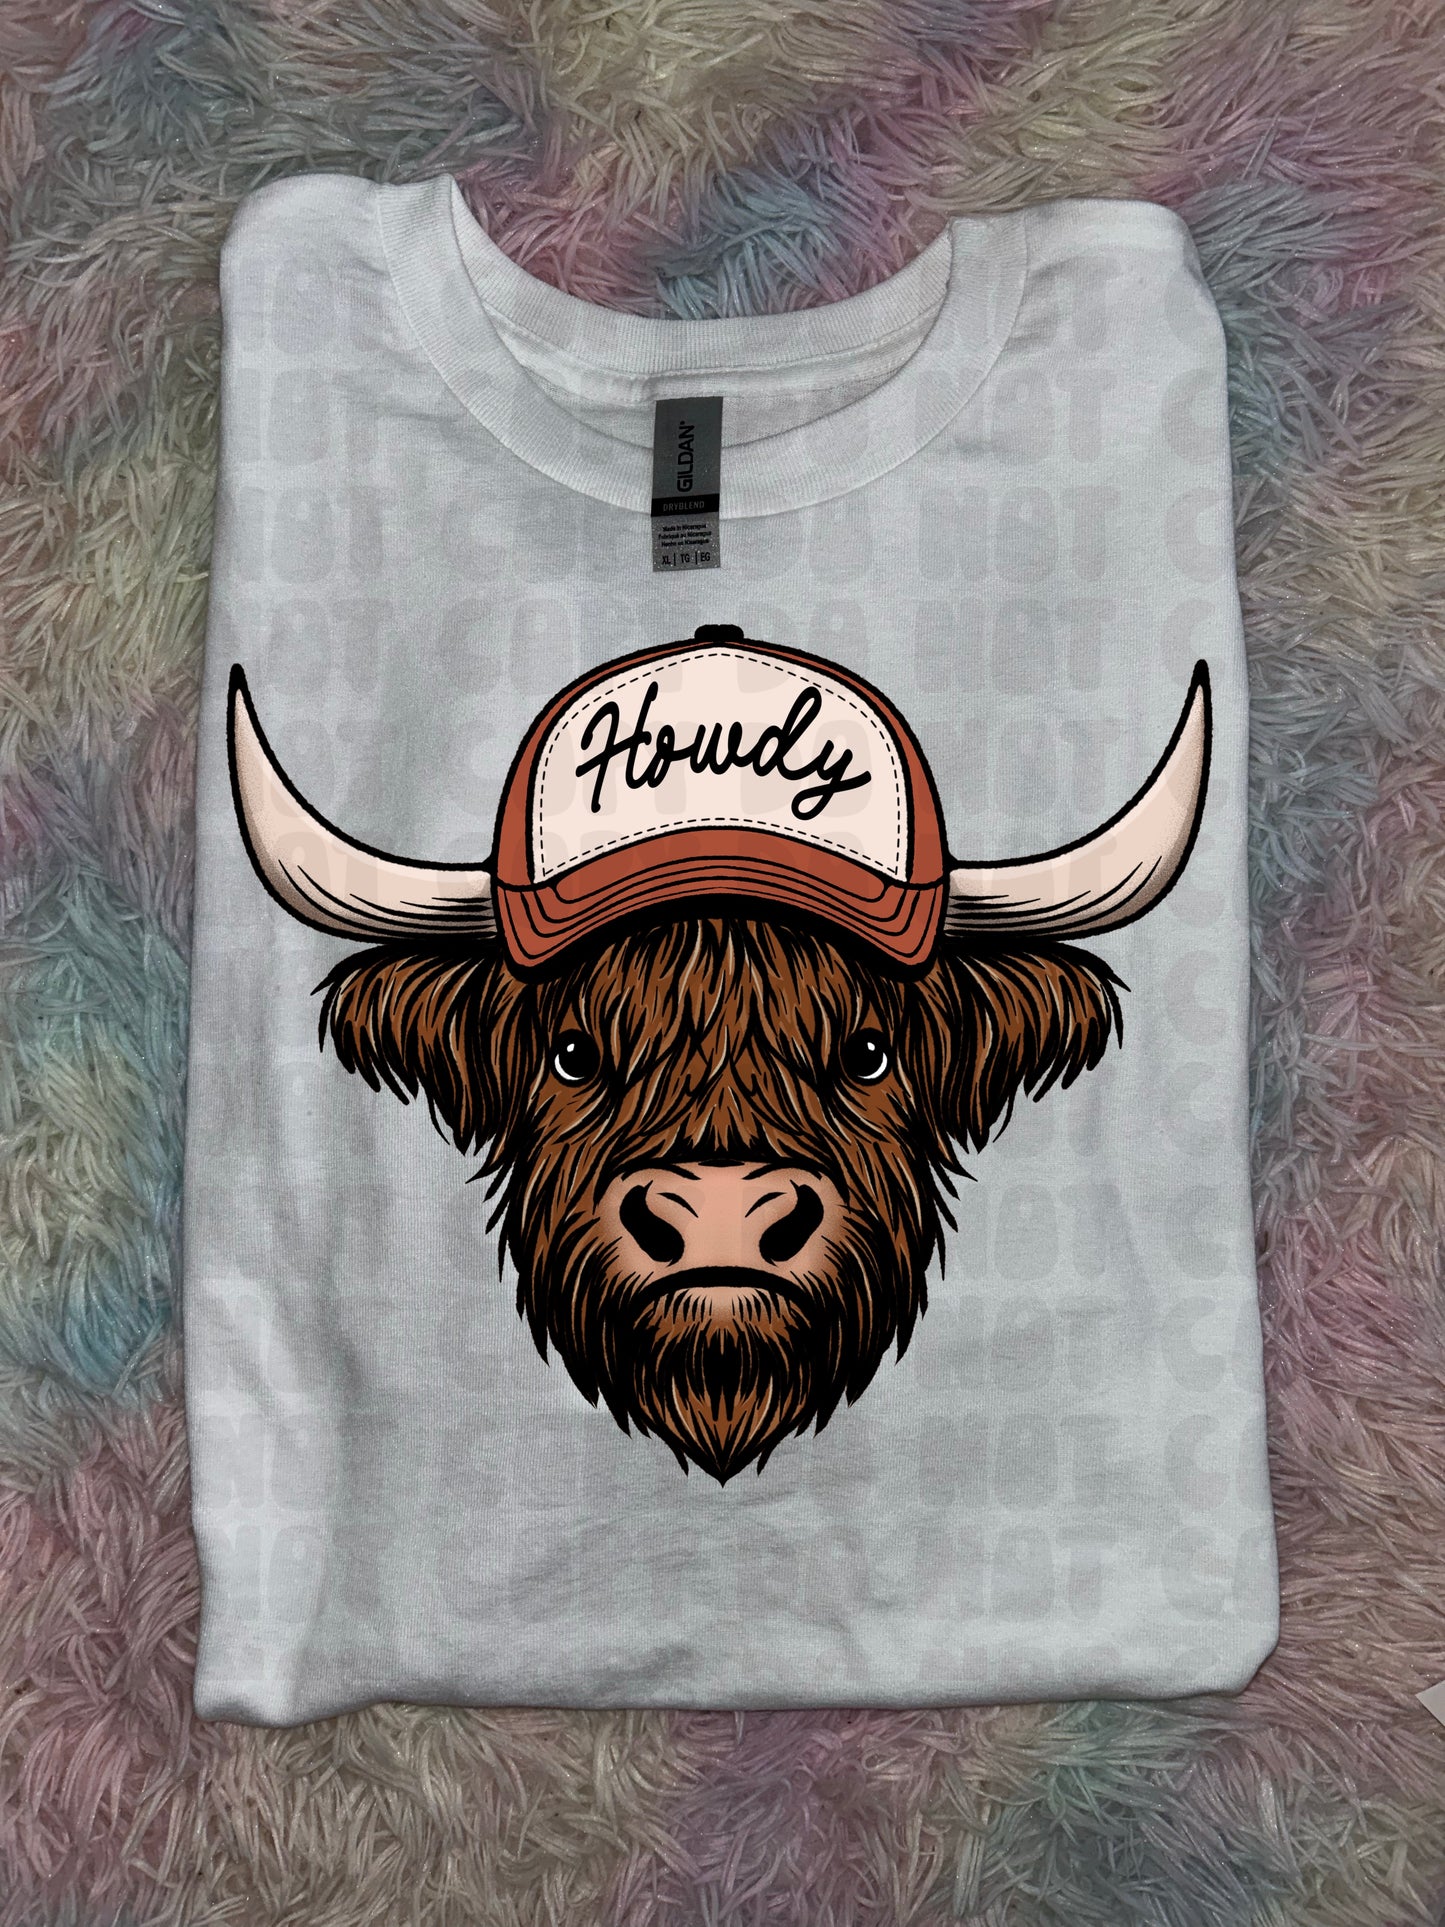 Howdy Cow PREORDER